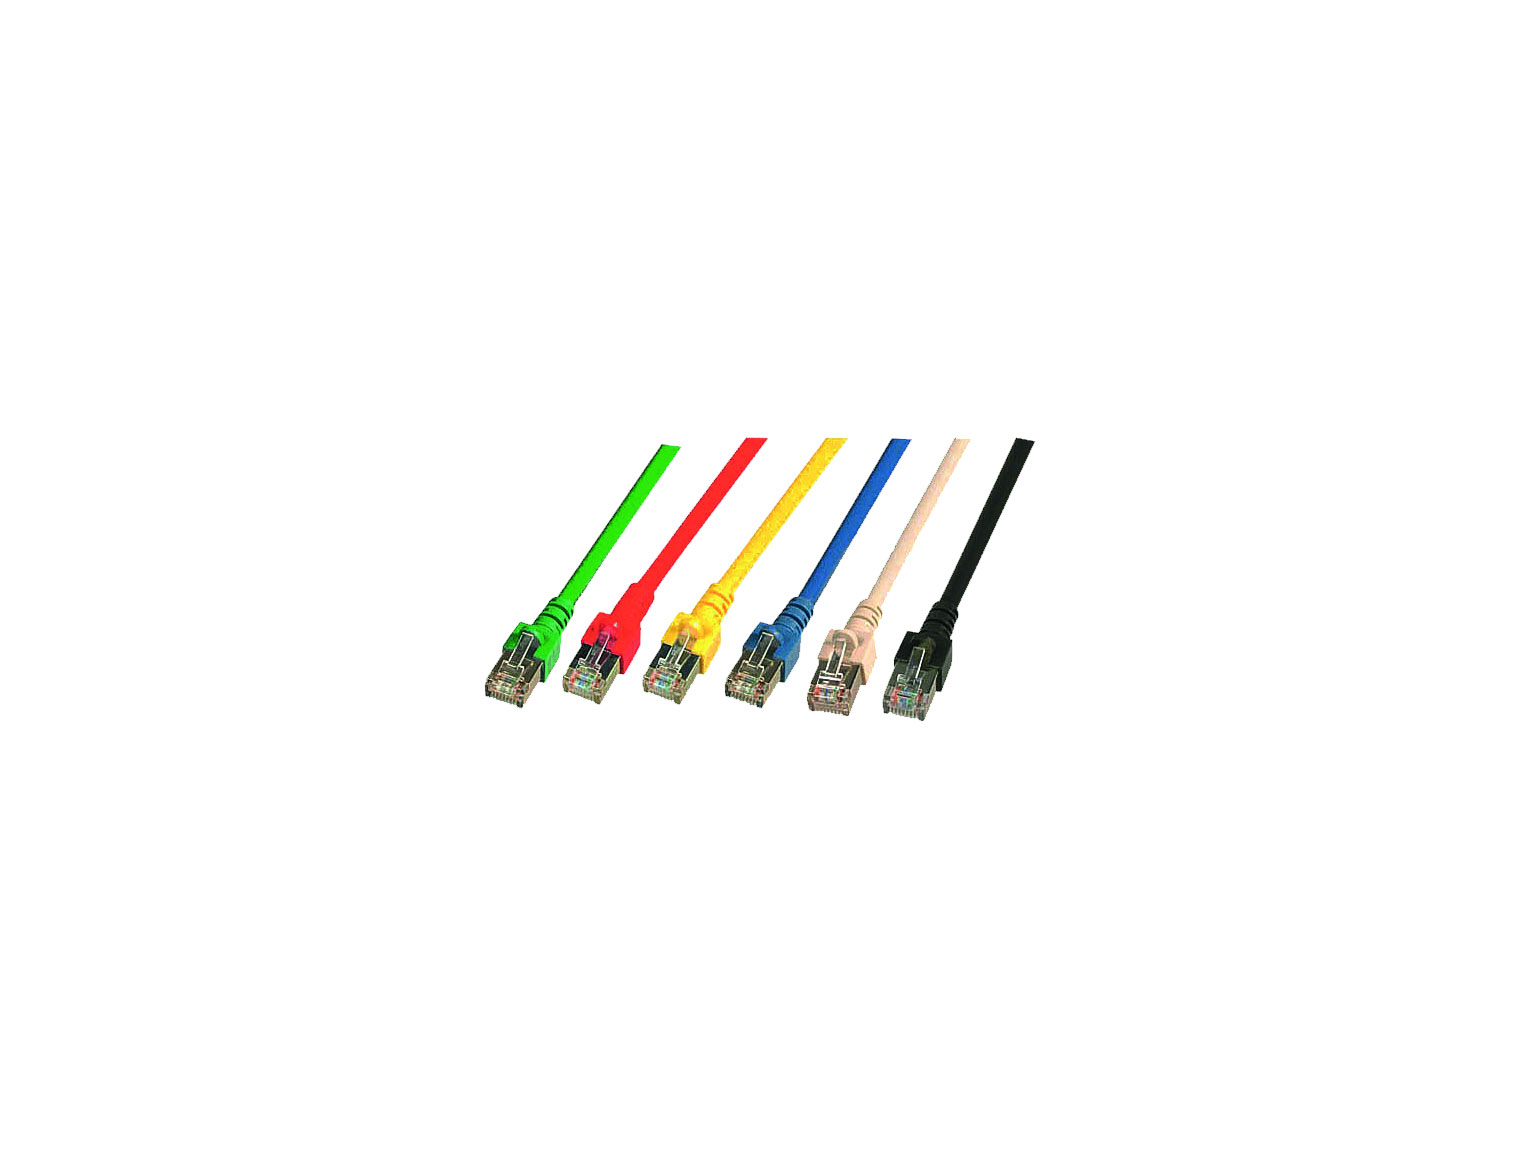 HELUKAT-CONNECTING-SYSTEMS-Patch-Cables-Kat-6-S-FTP-RJ45-M806253